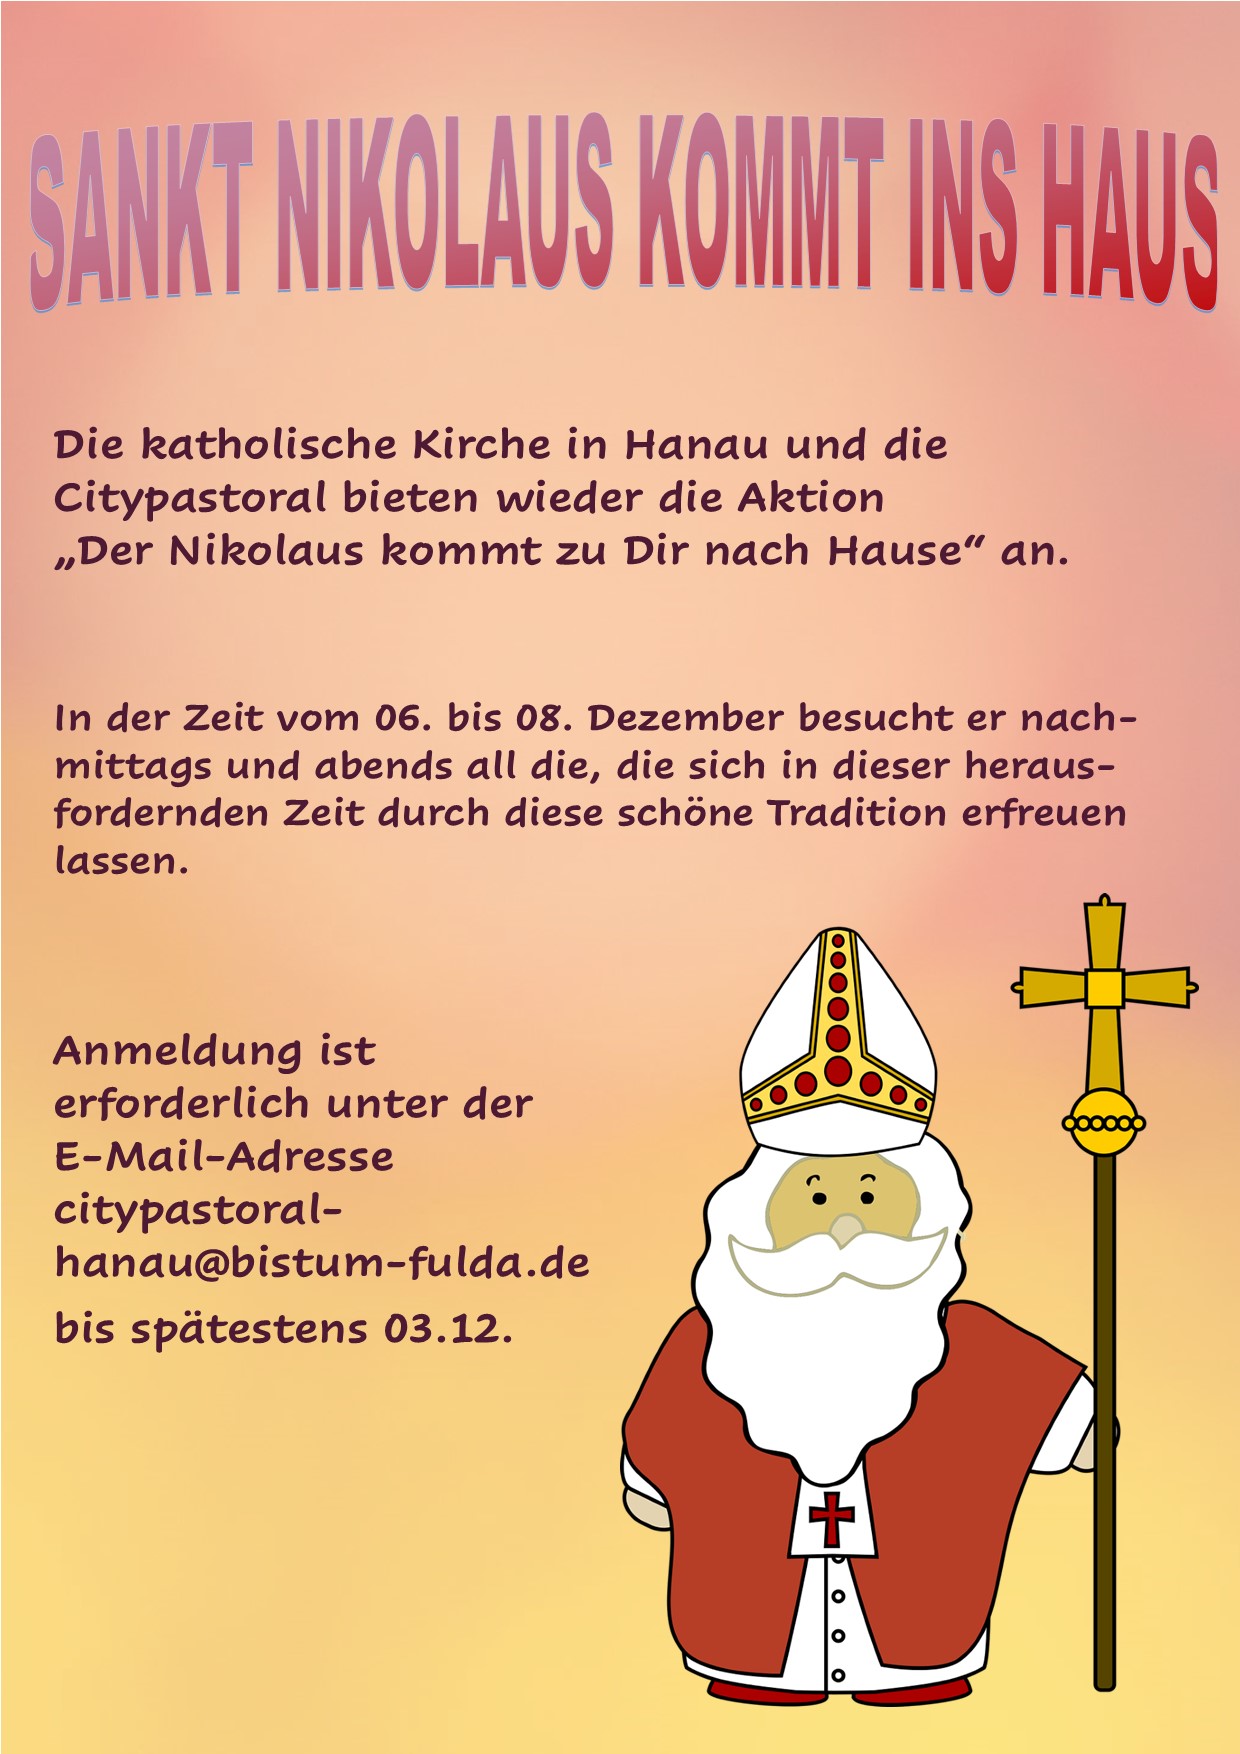 Featured image for “Sankt Nikolaus kommt ins Haus”